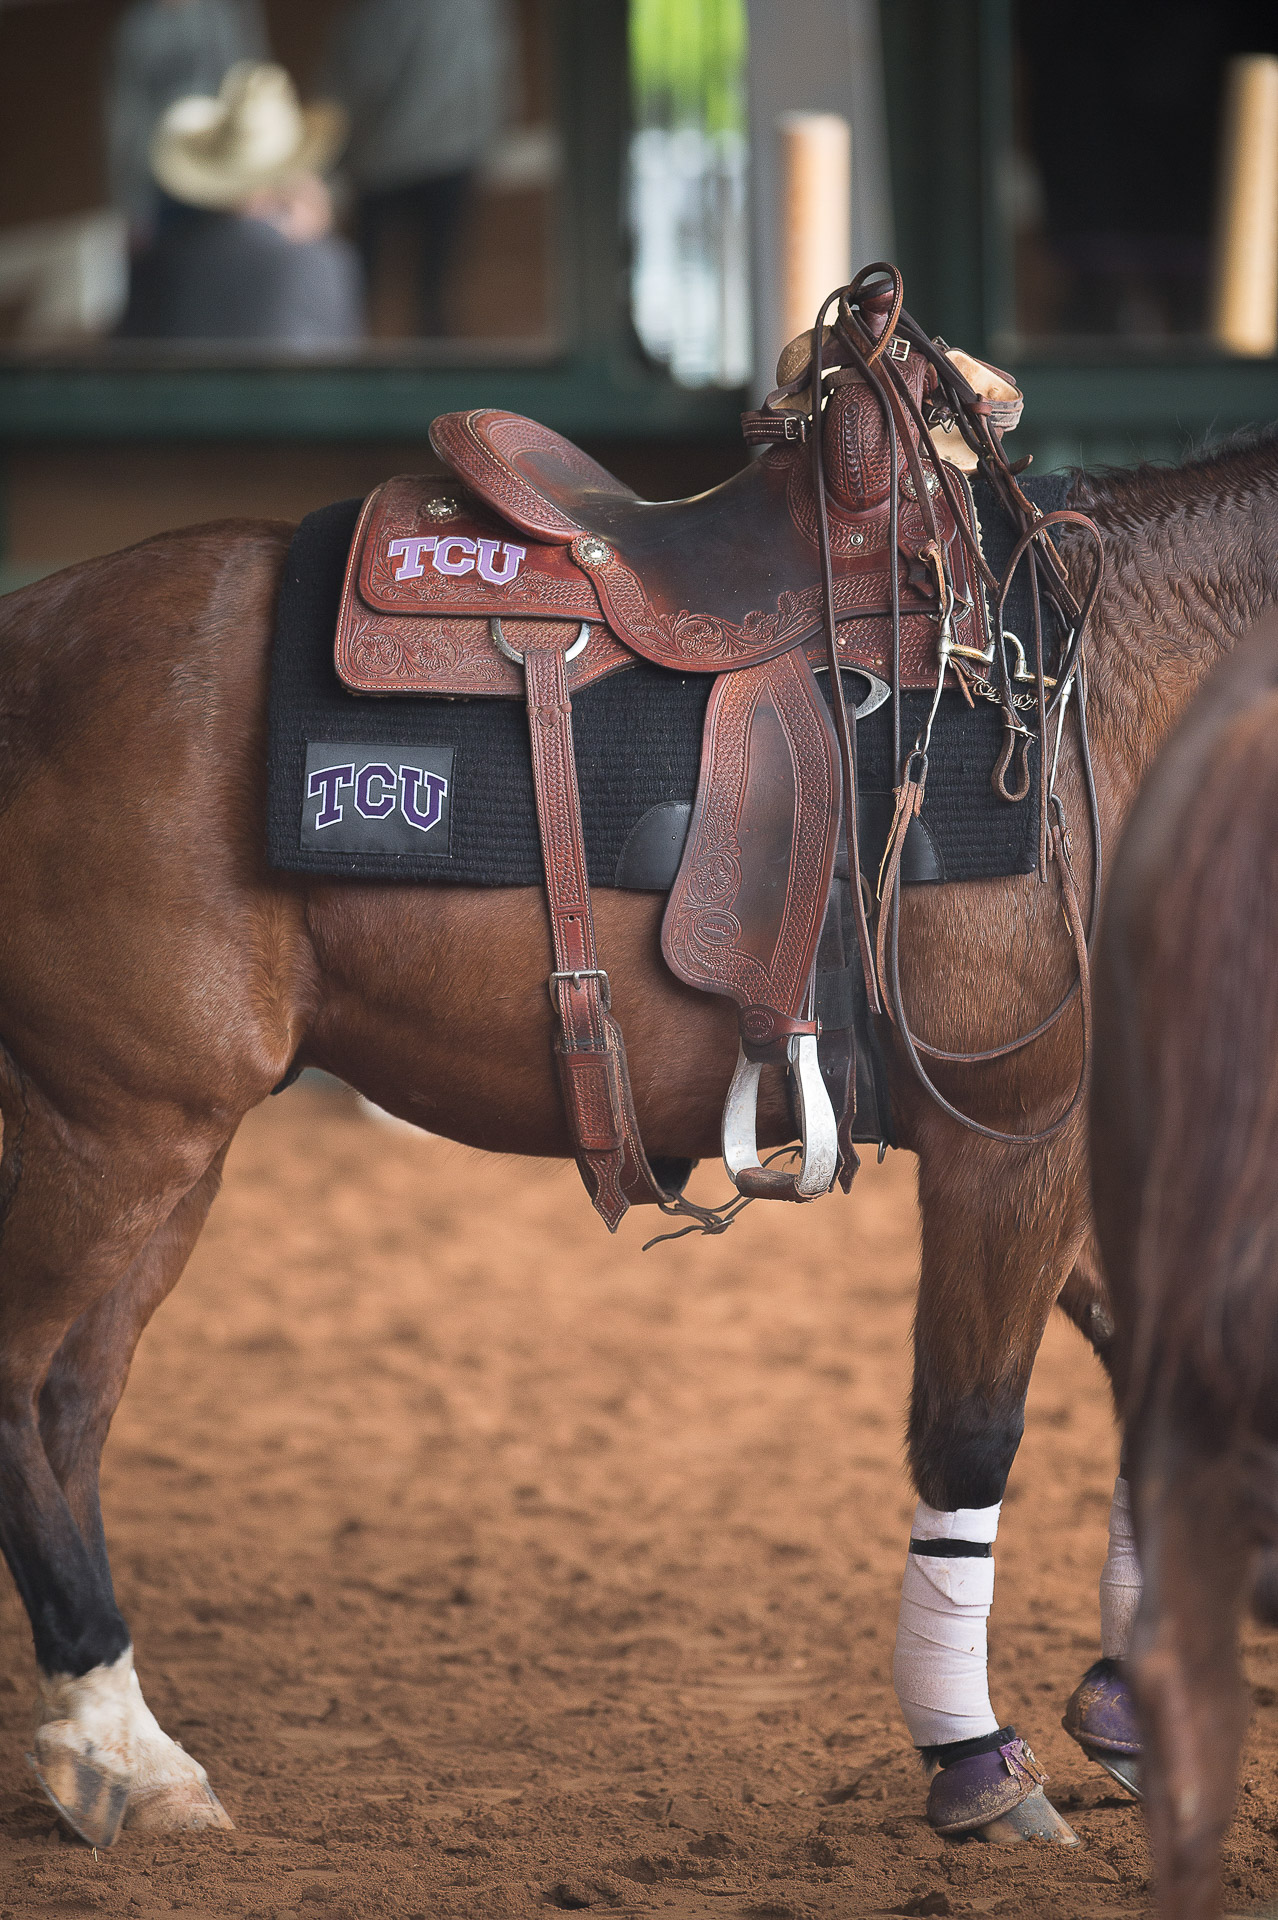 FALL17-Feature-Equestrian_Big12-championship-tack__GEE